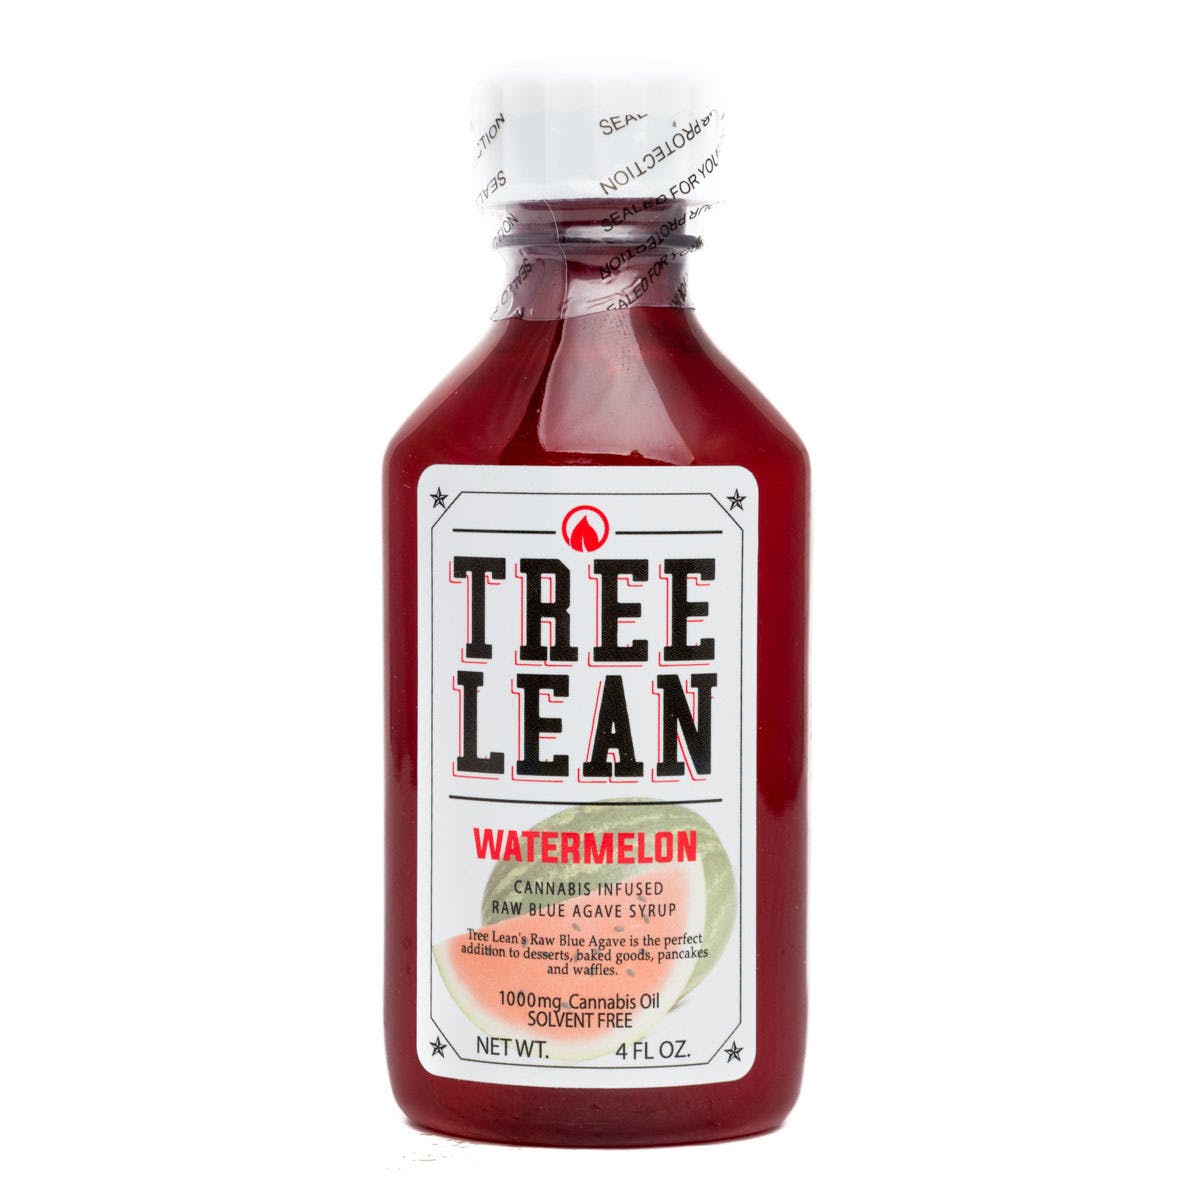 drink-tree-lean-watermelon-cannabis-infused-syrup